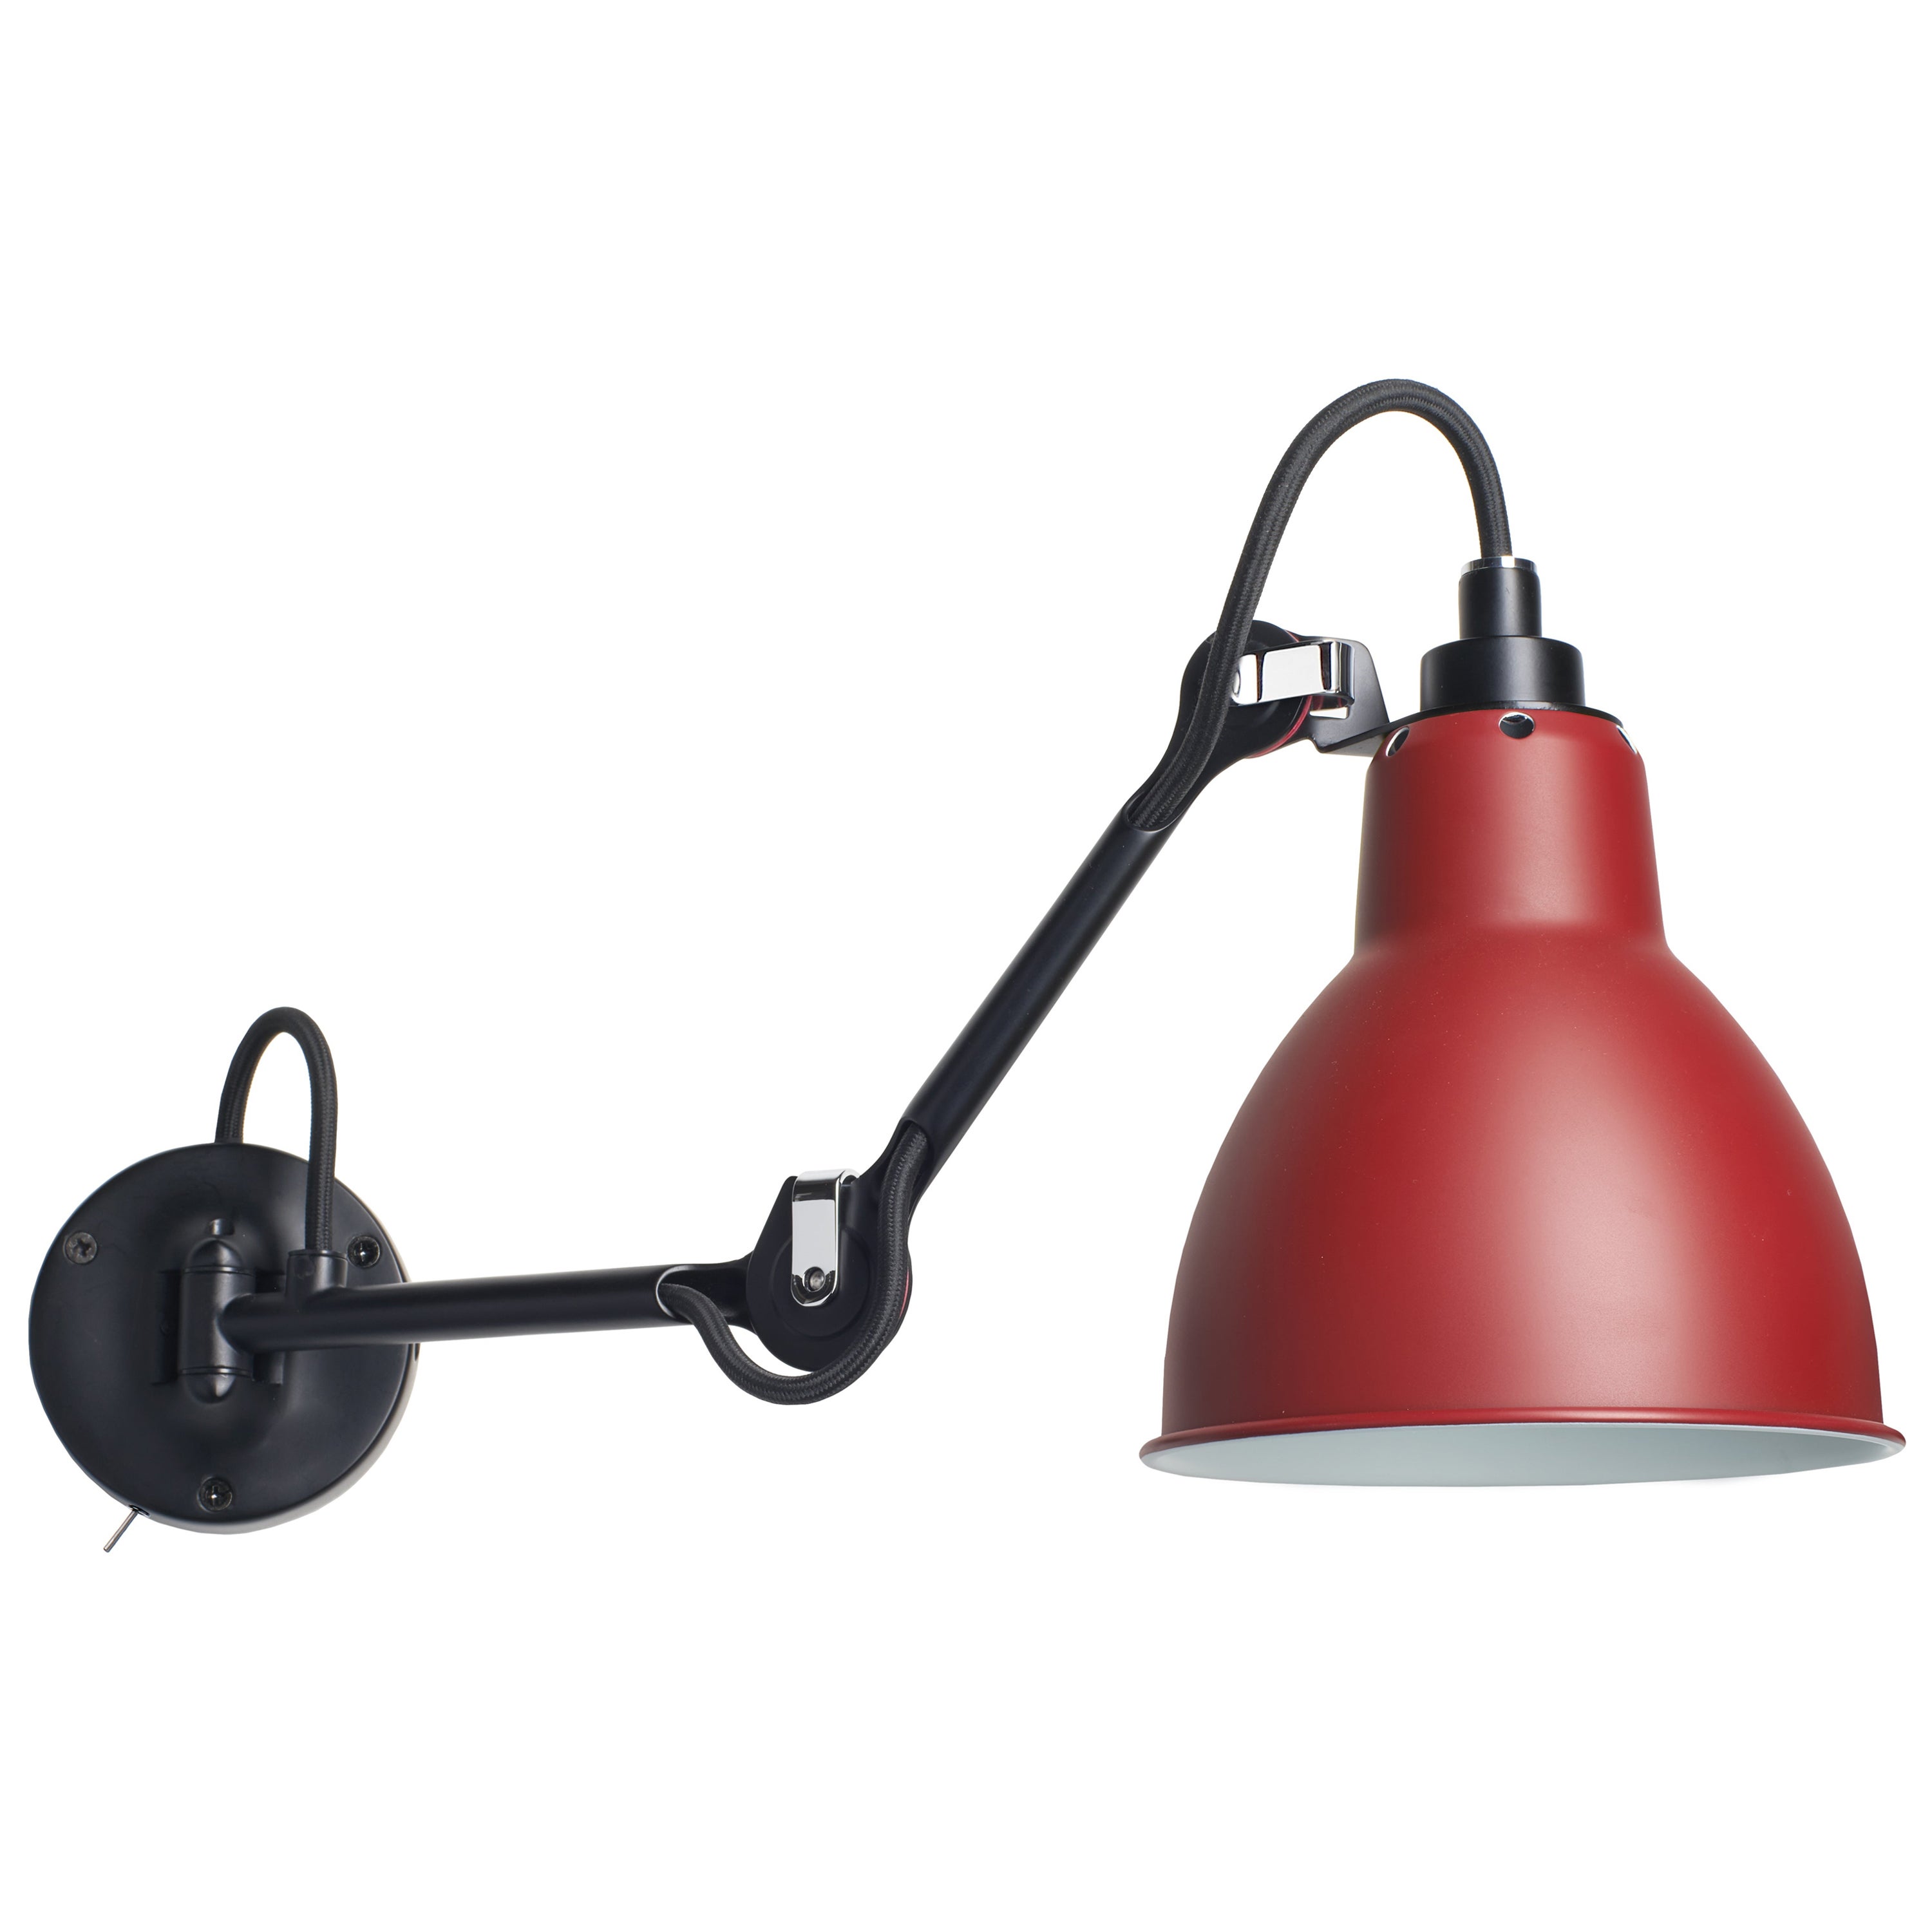 DCW Editions La Lampe Gras N°204 SW Wall Lamp in Black Steel Arm and Red Shade